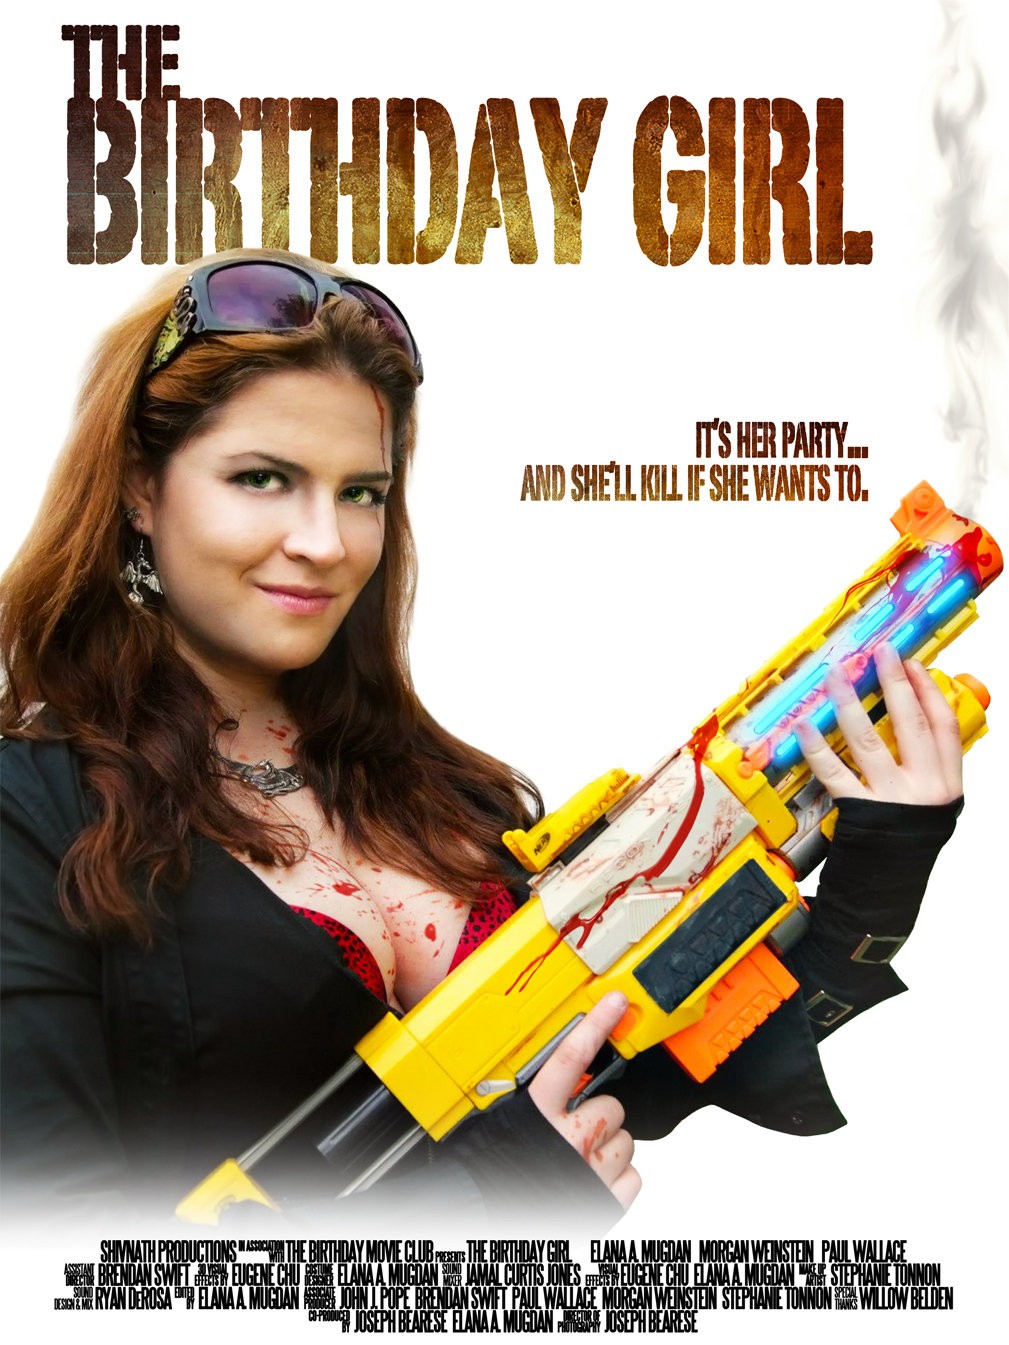 Extra Large Movie Poster Image for The Birthday Girl